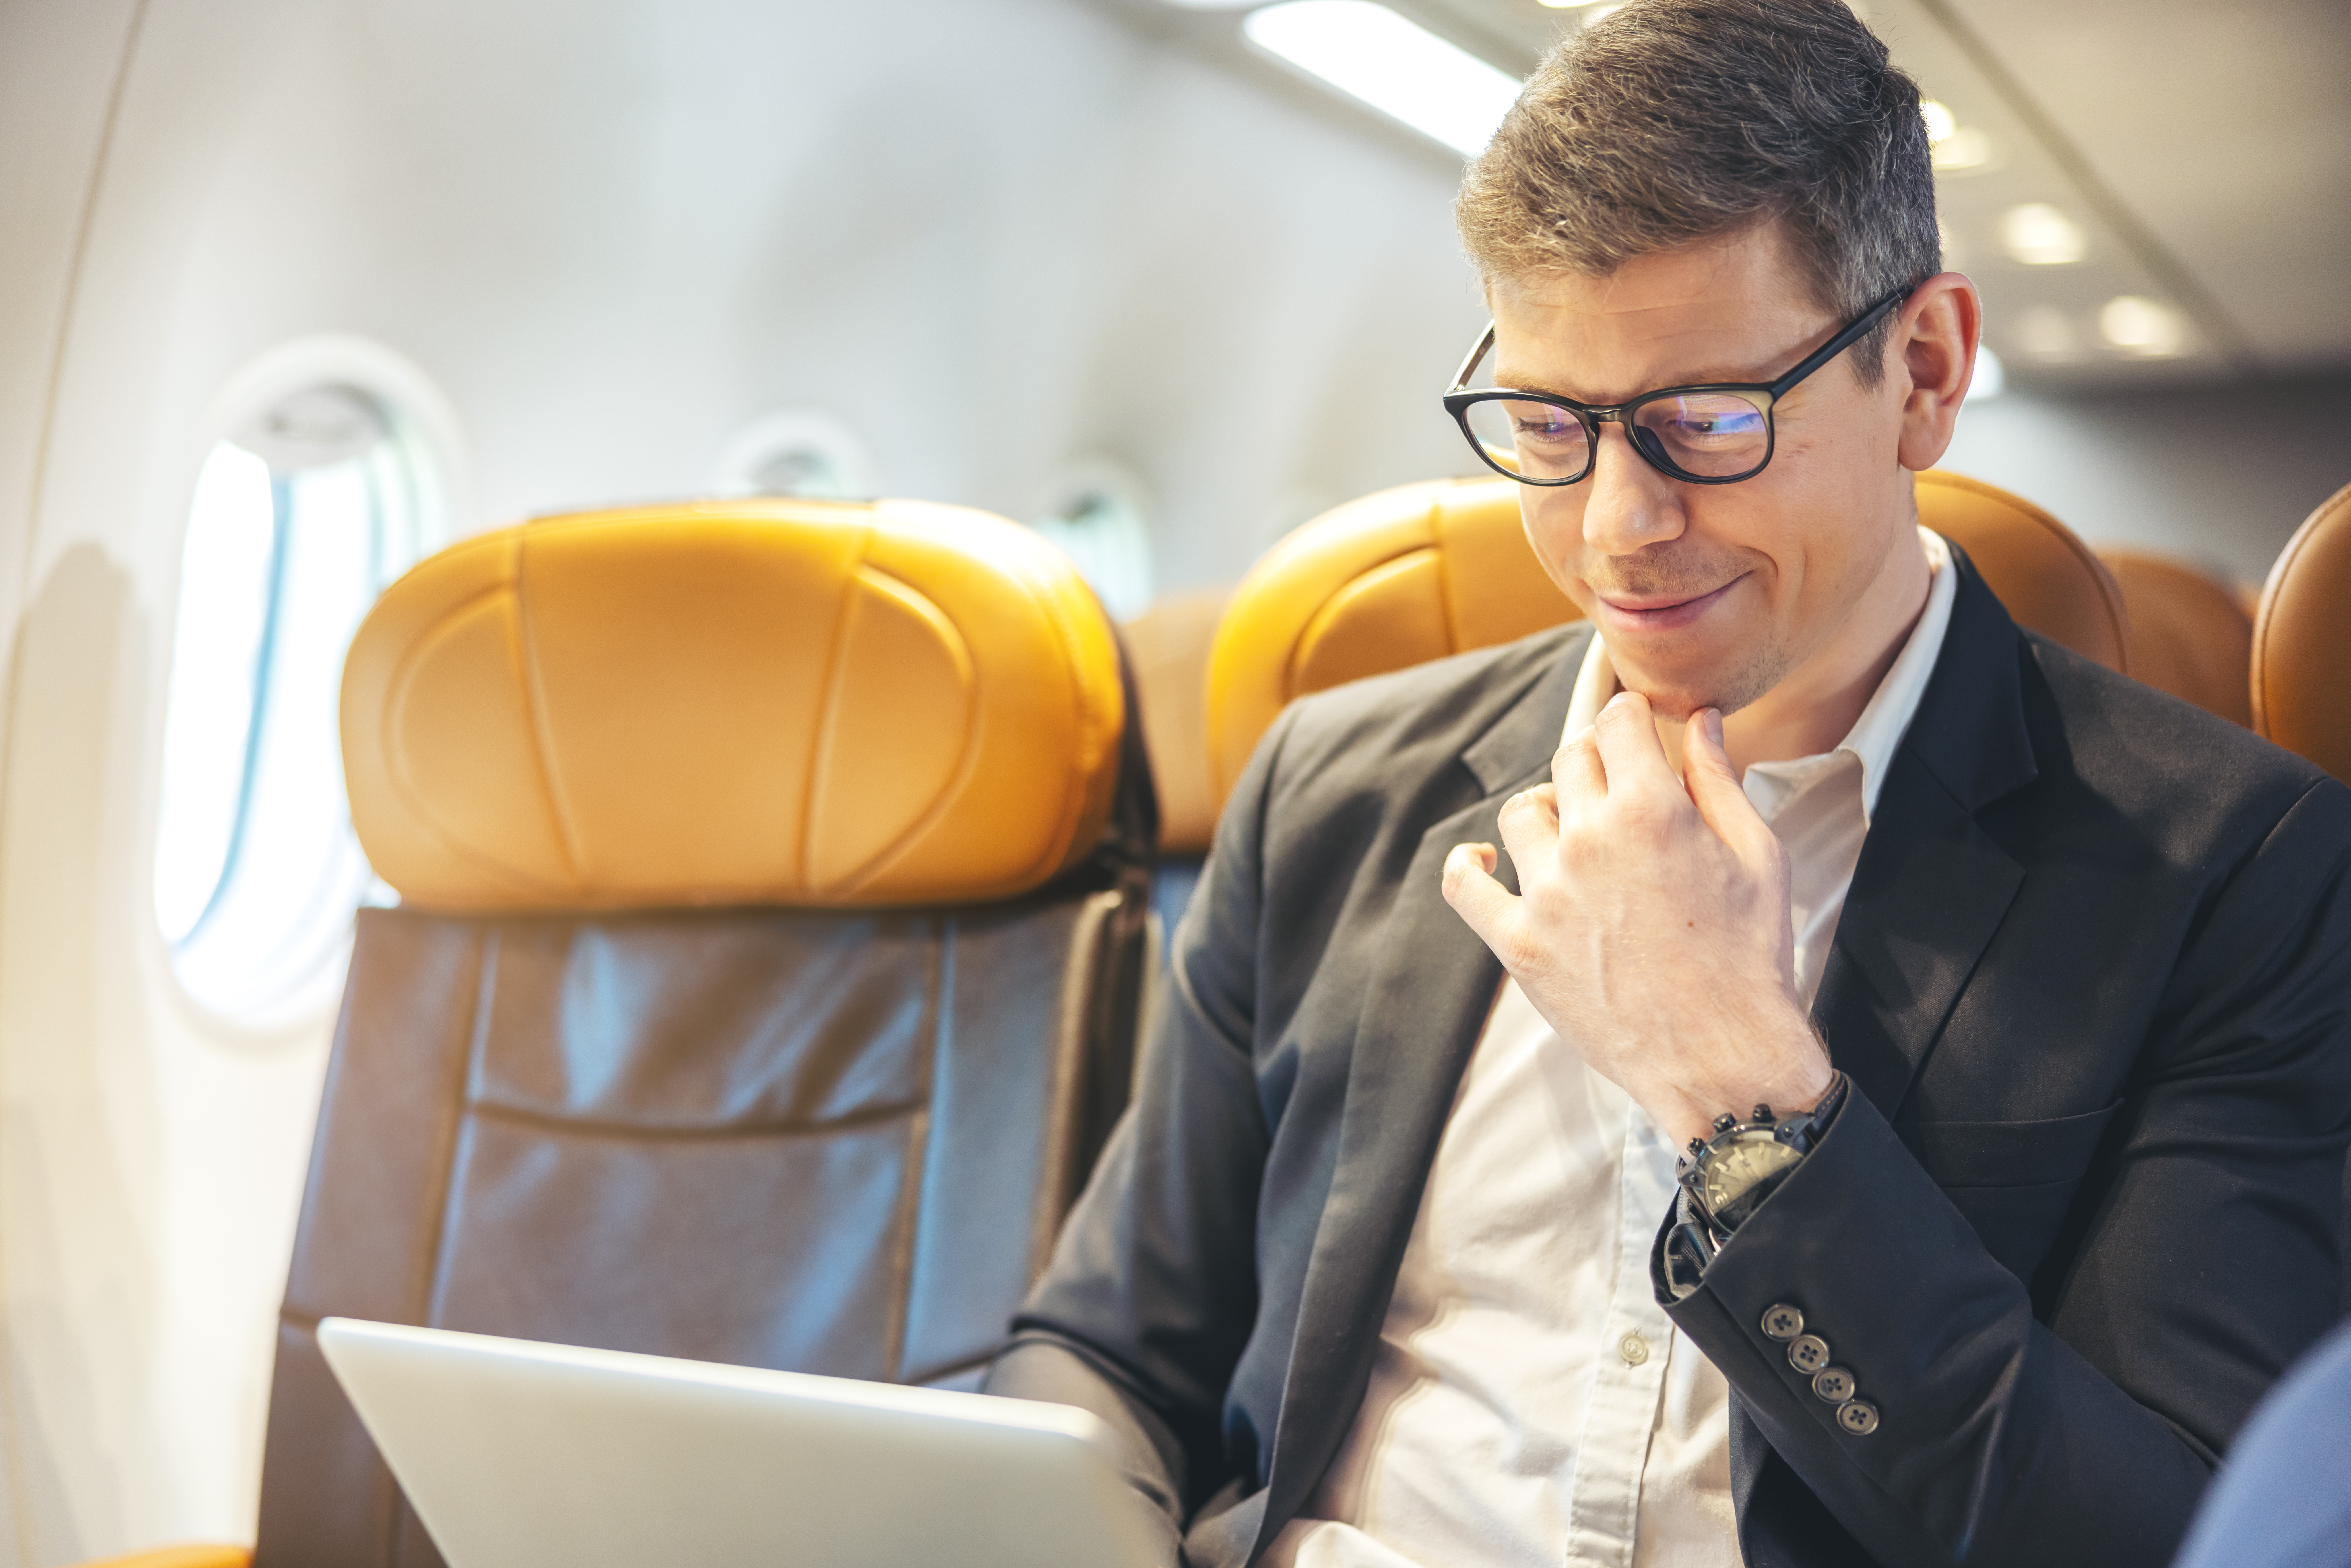  How to give employees a top business travel experience - every time